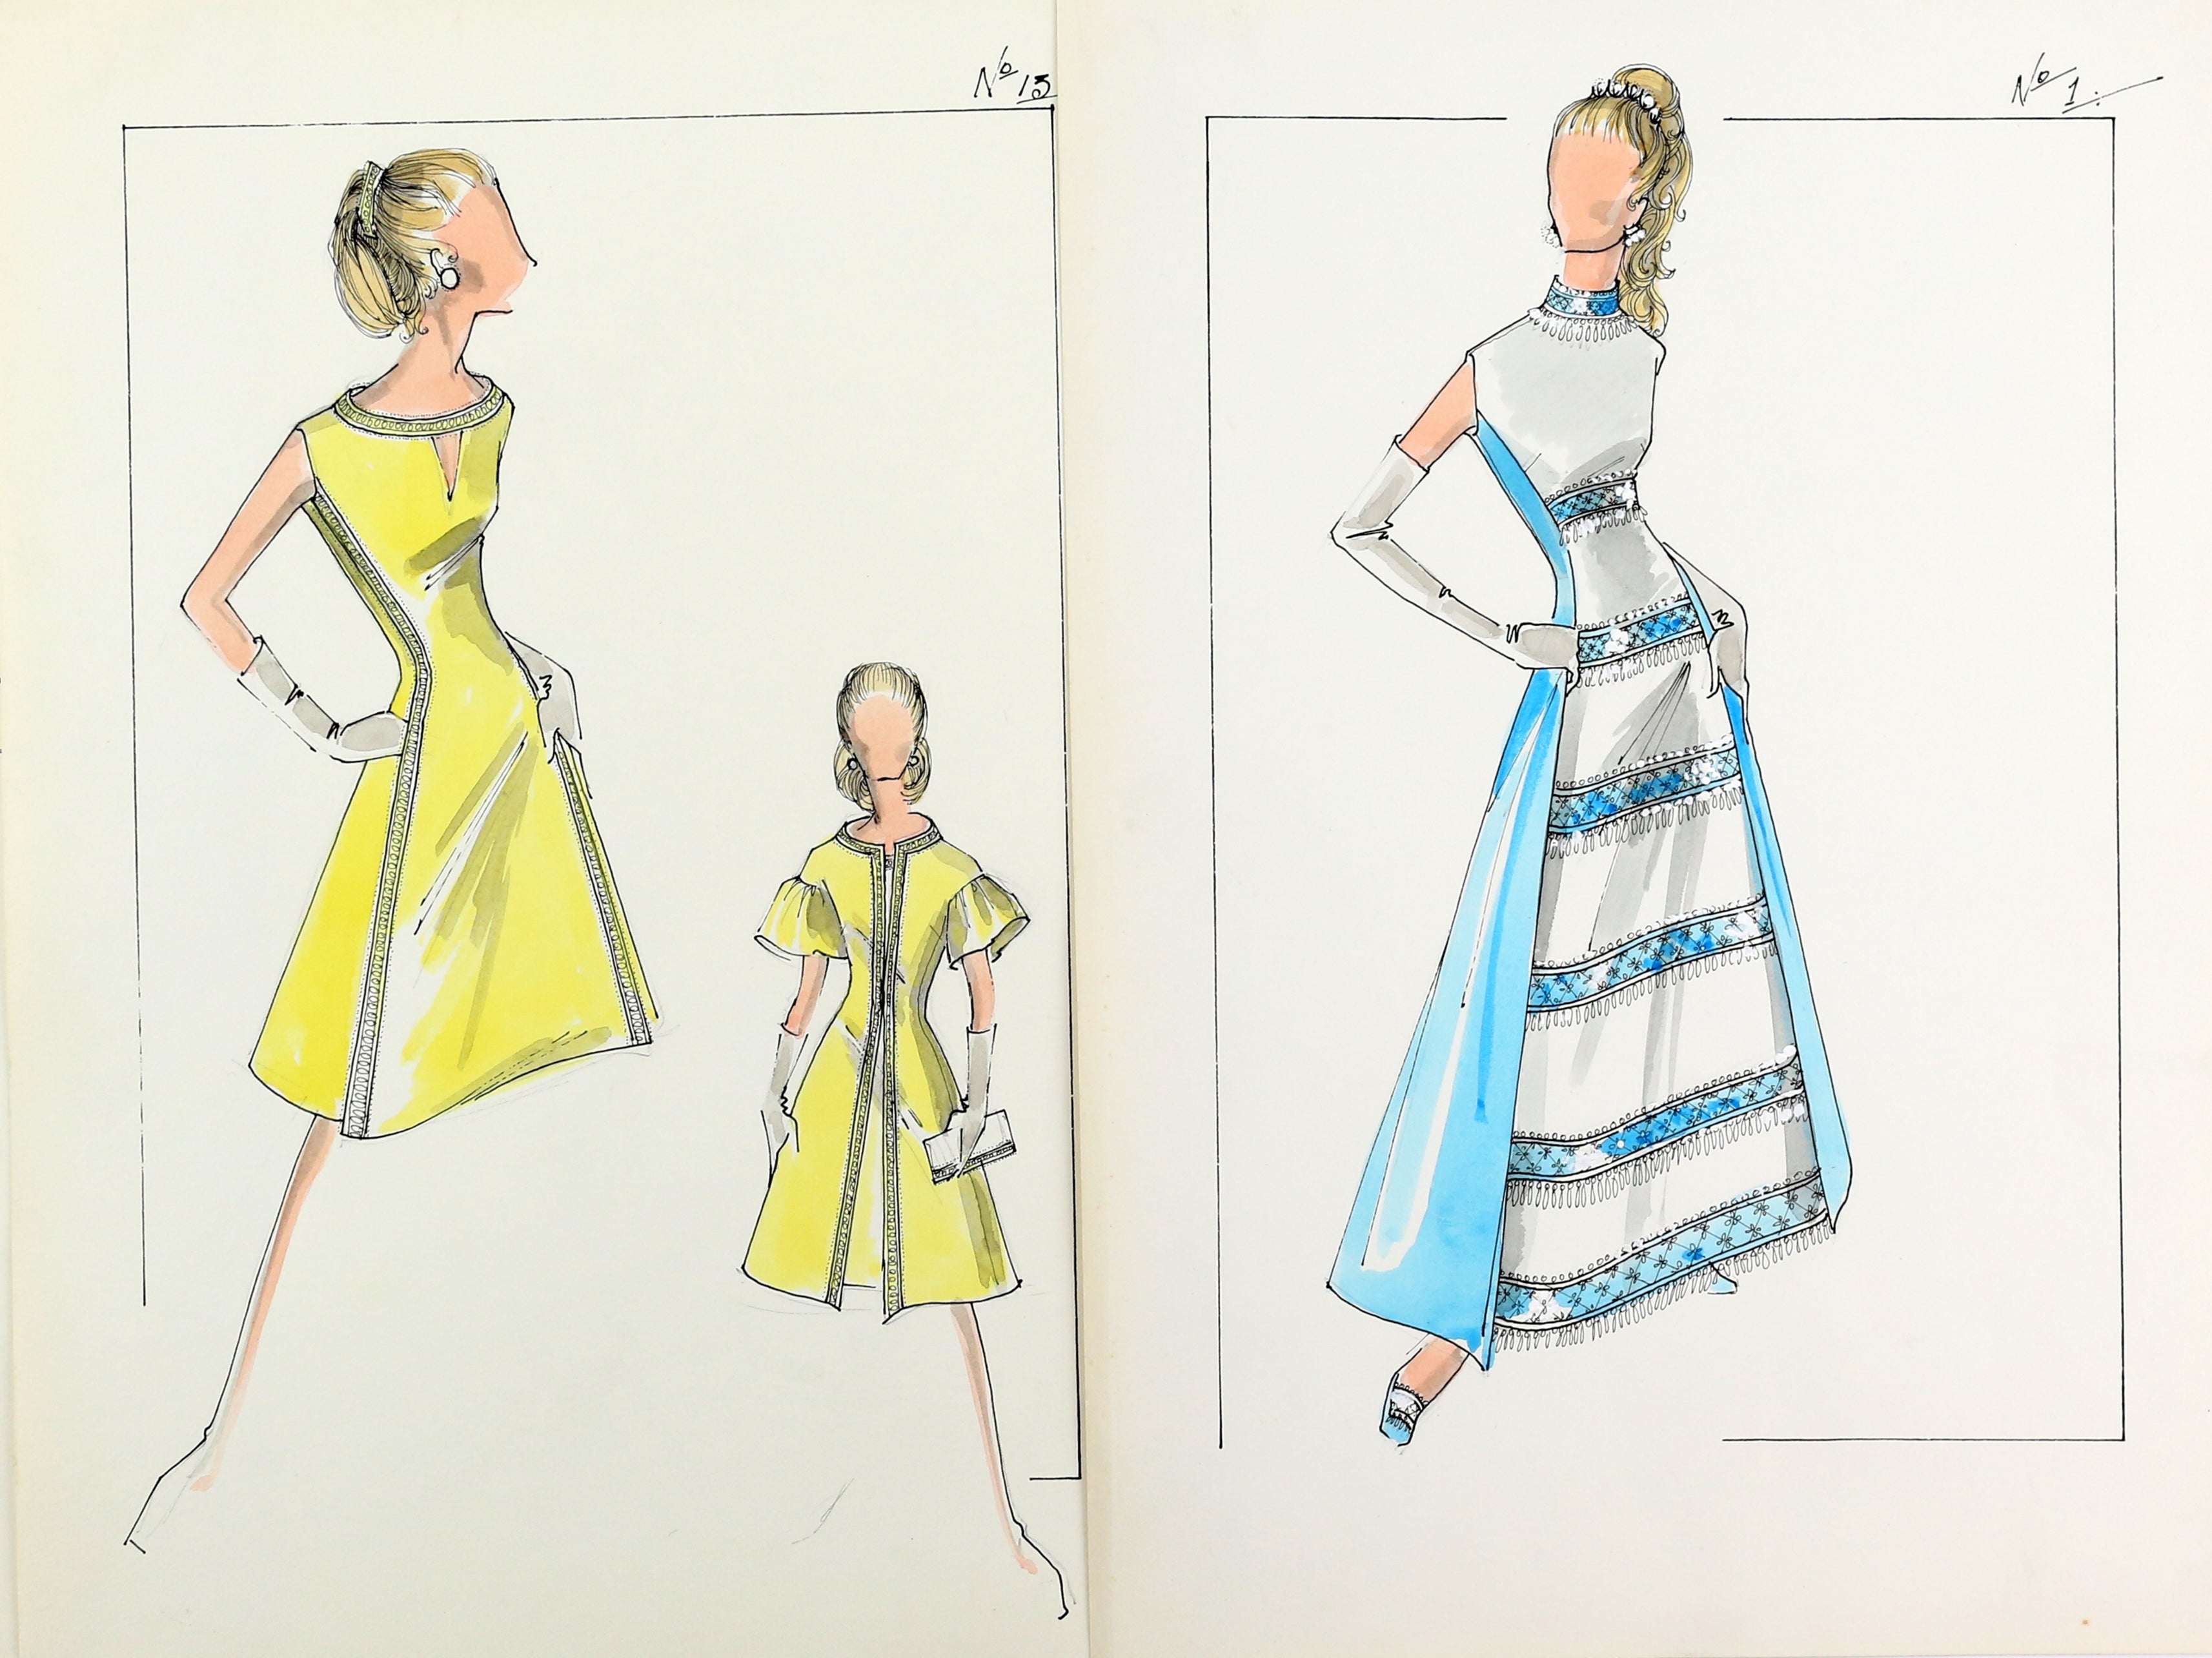 Sir Norman Hartnell’s sketches of dresses for Princess Anne